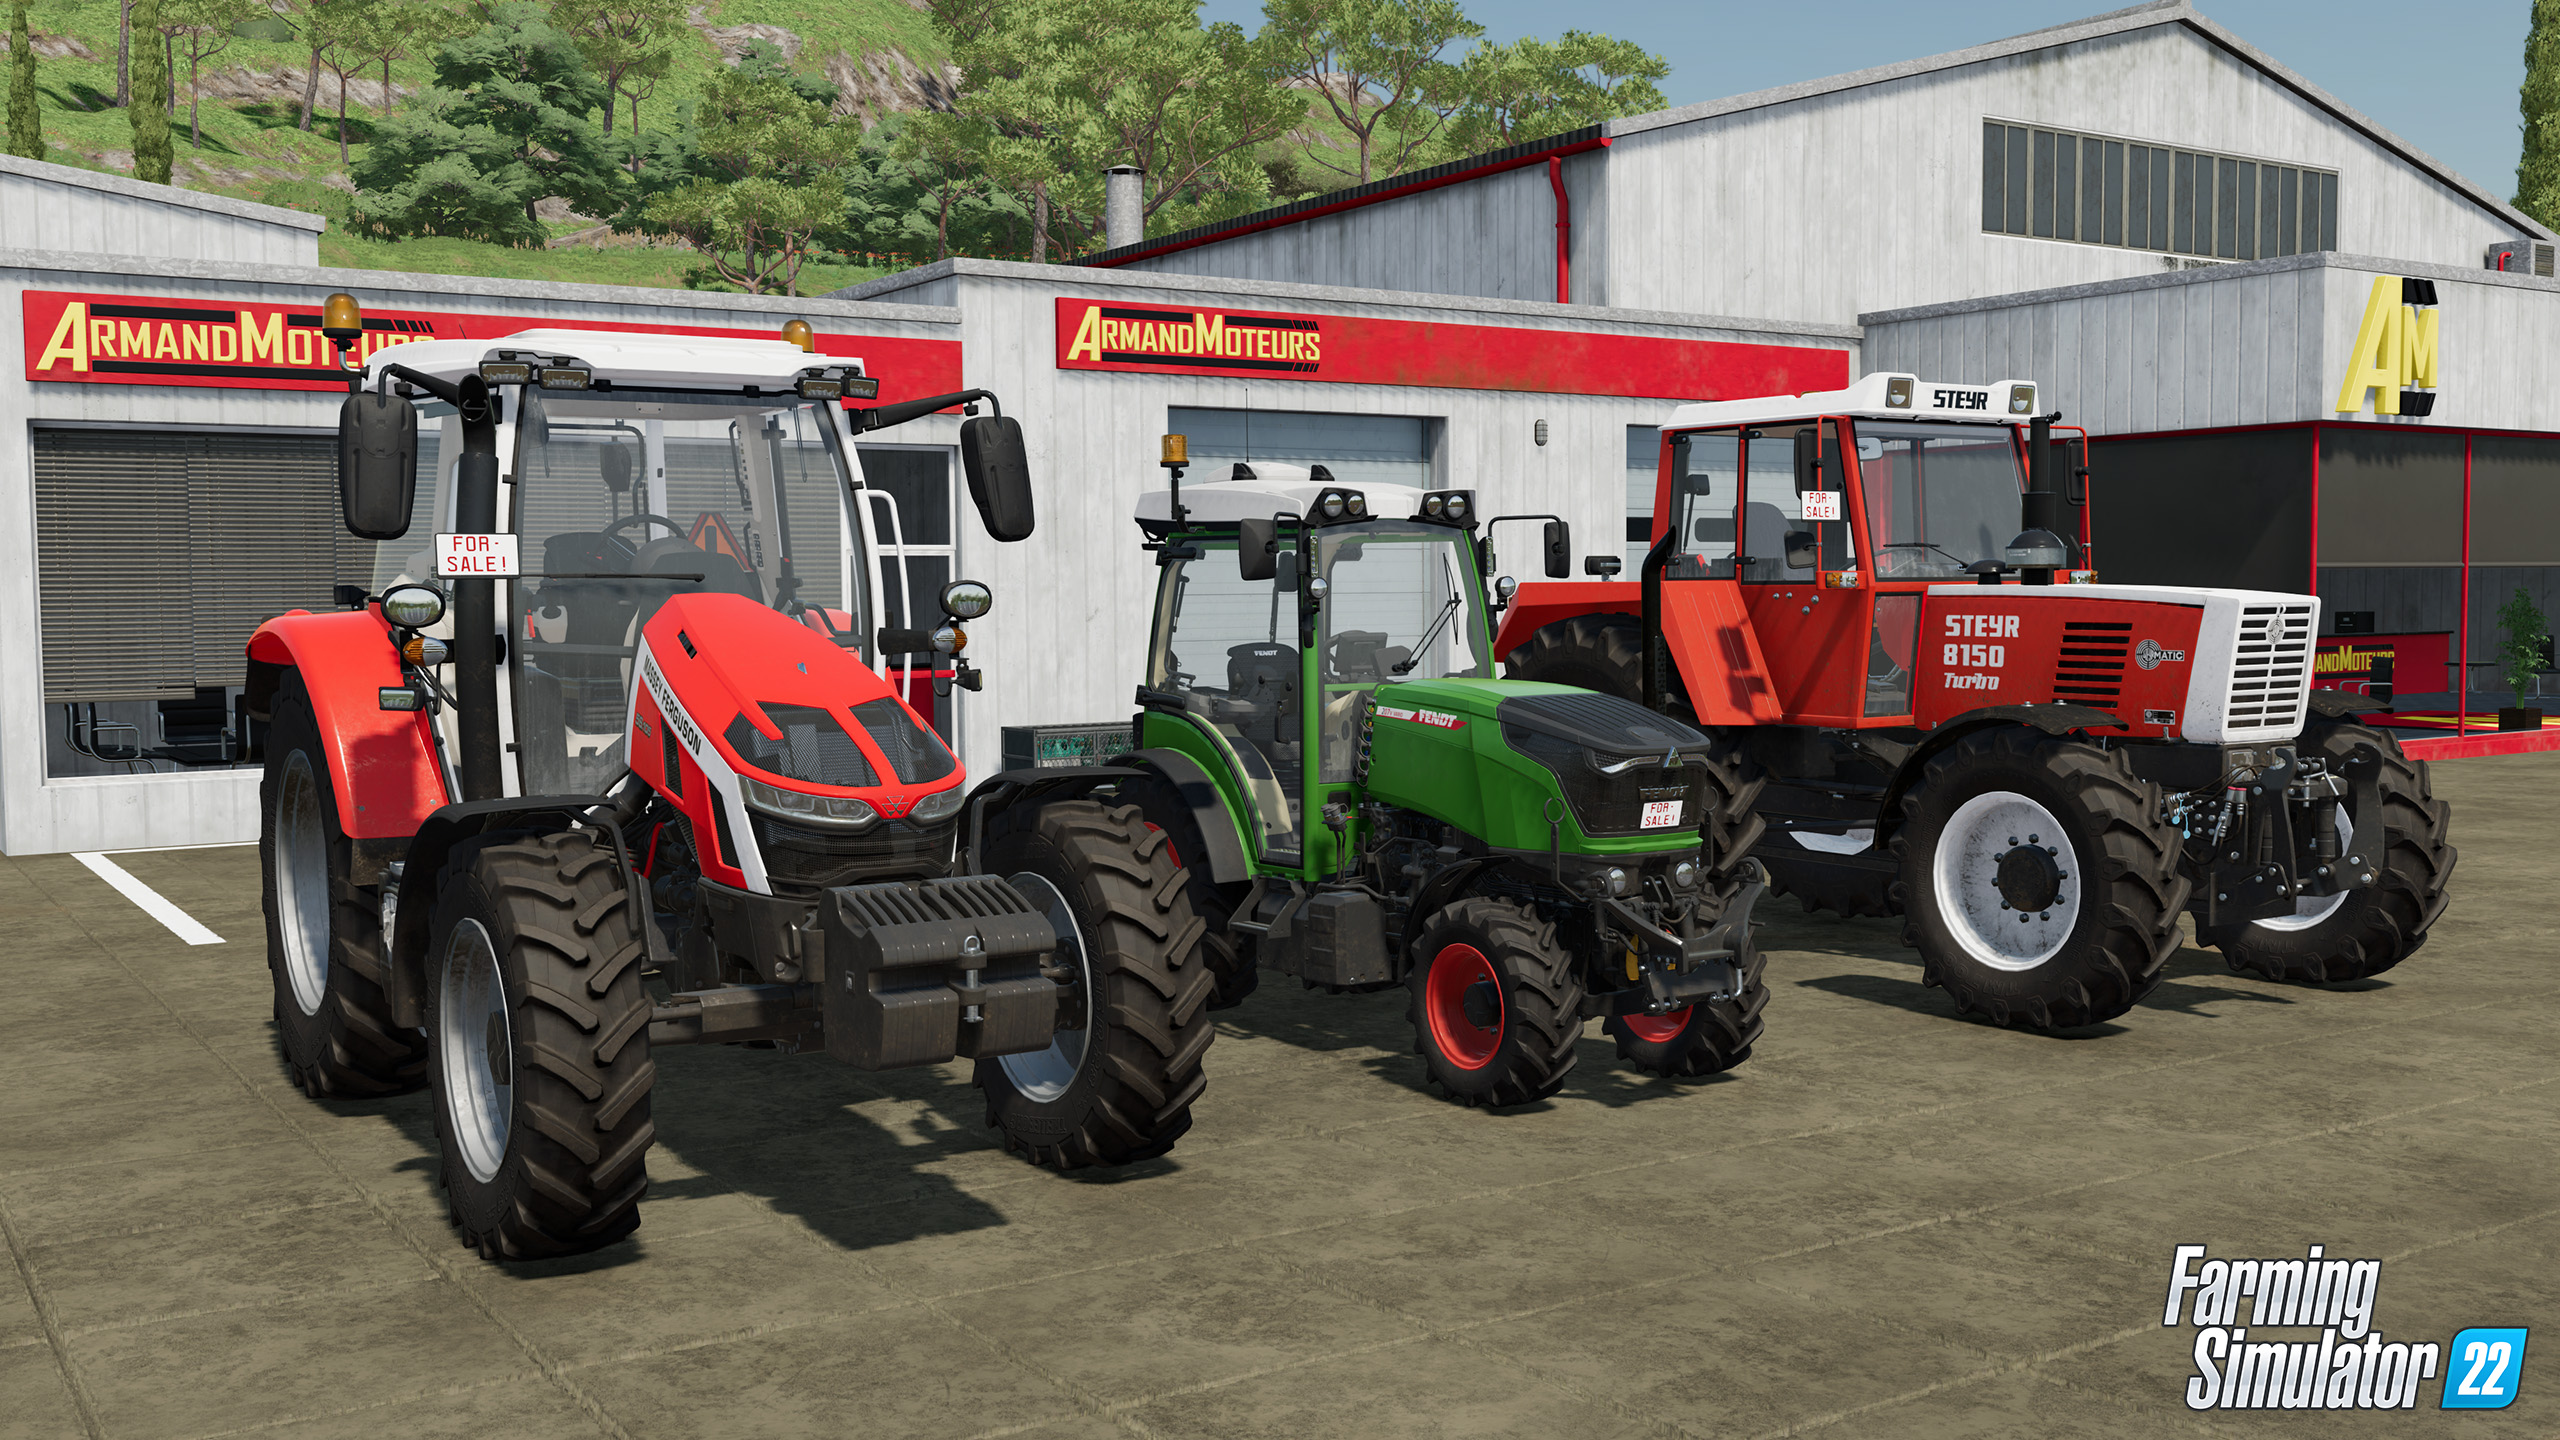 Farming Simulator 22: Buying Used vehicle can be good choice